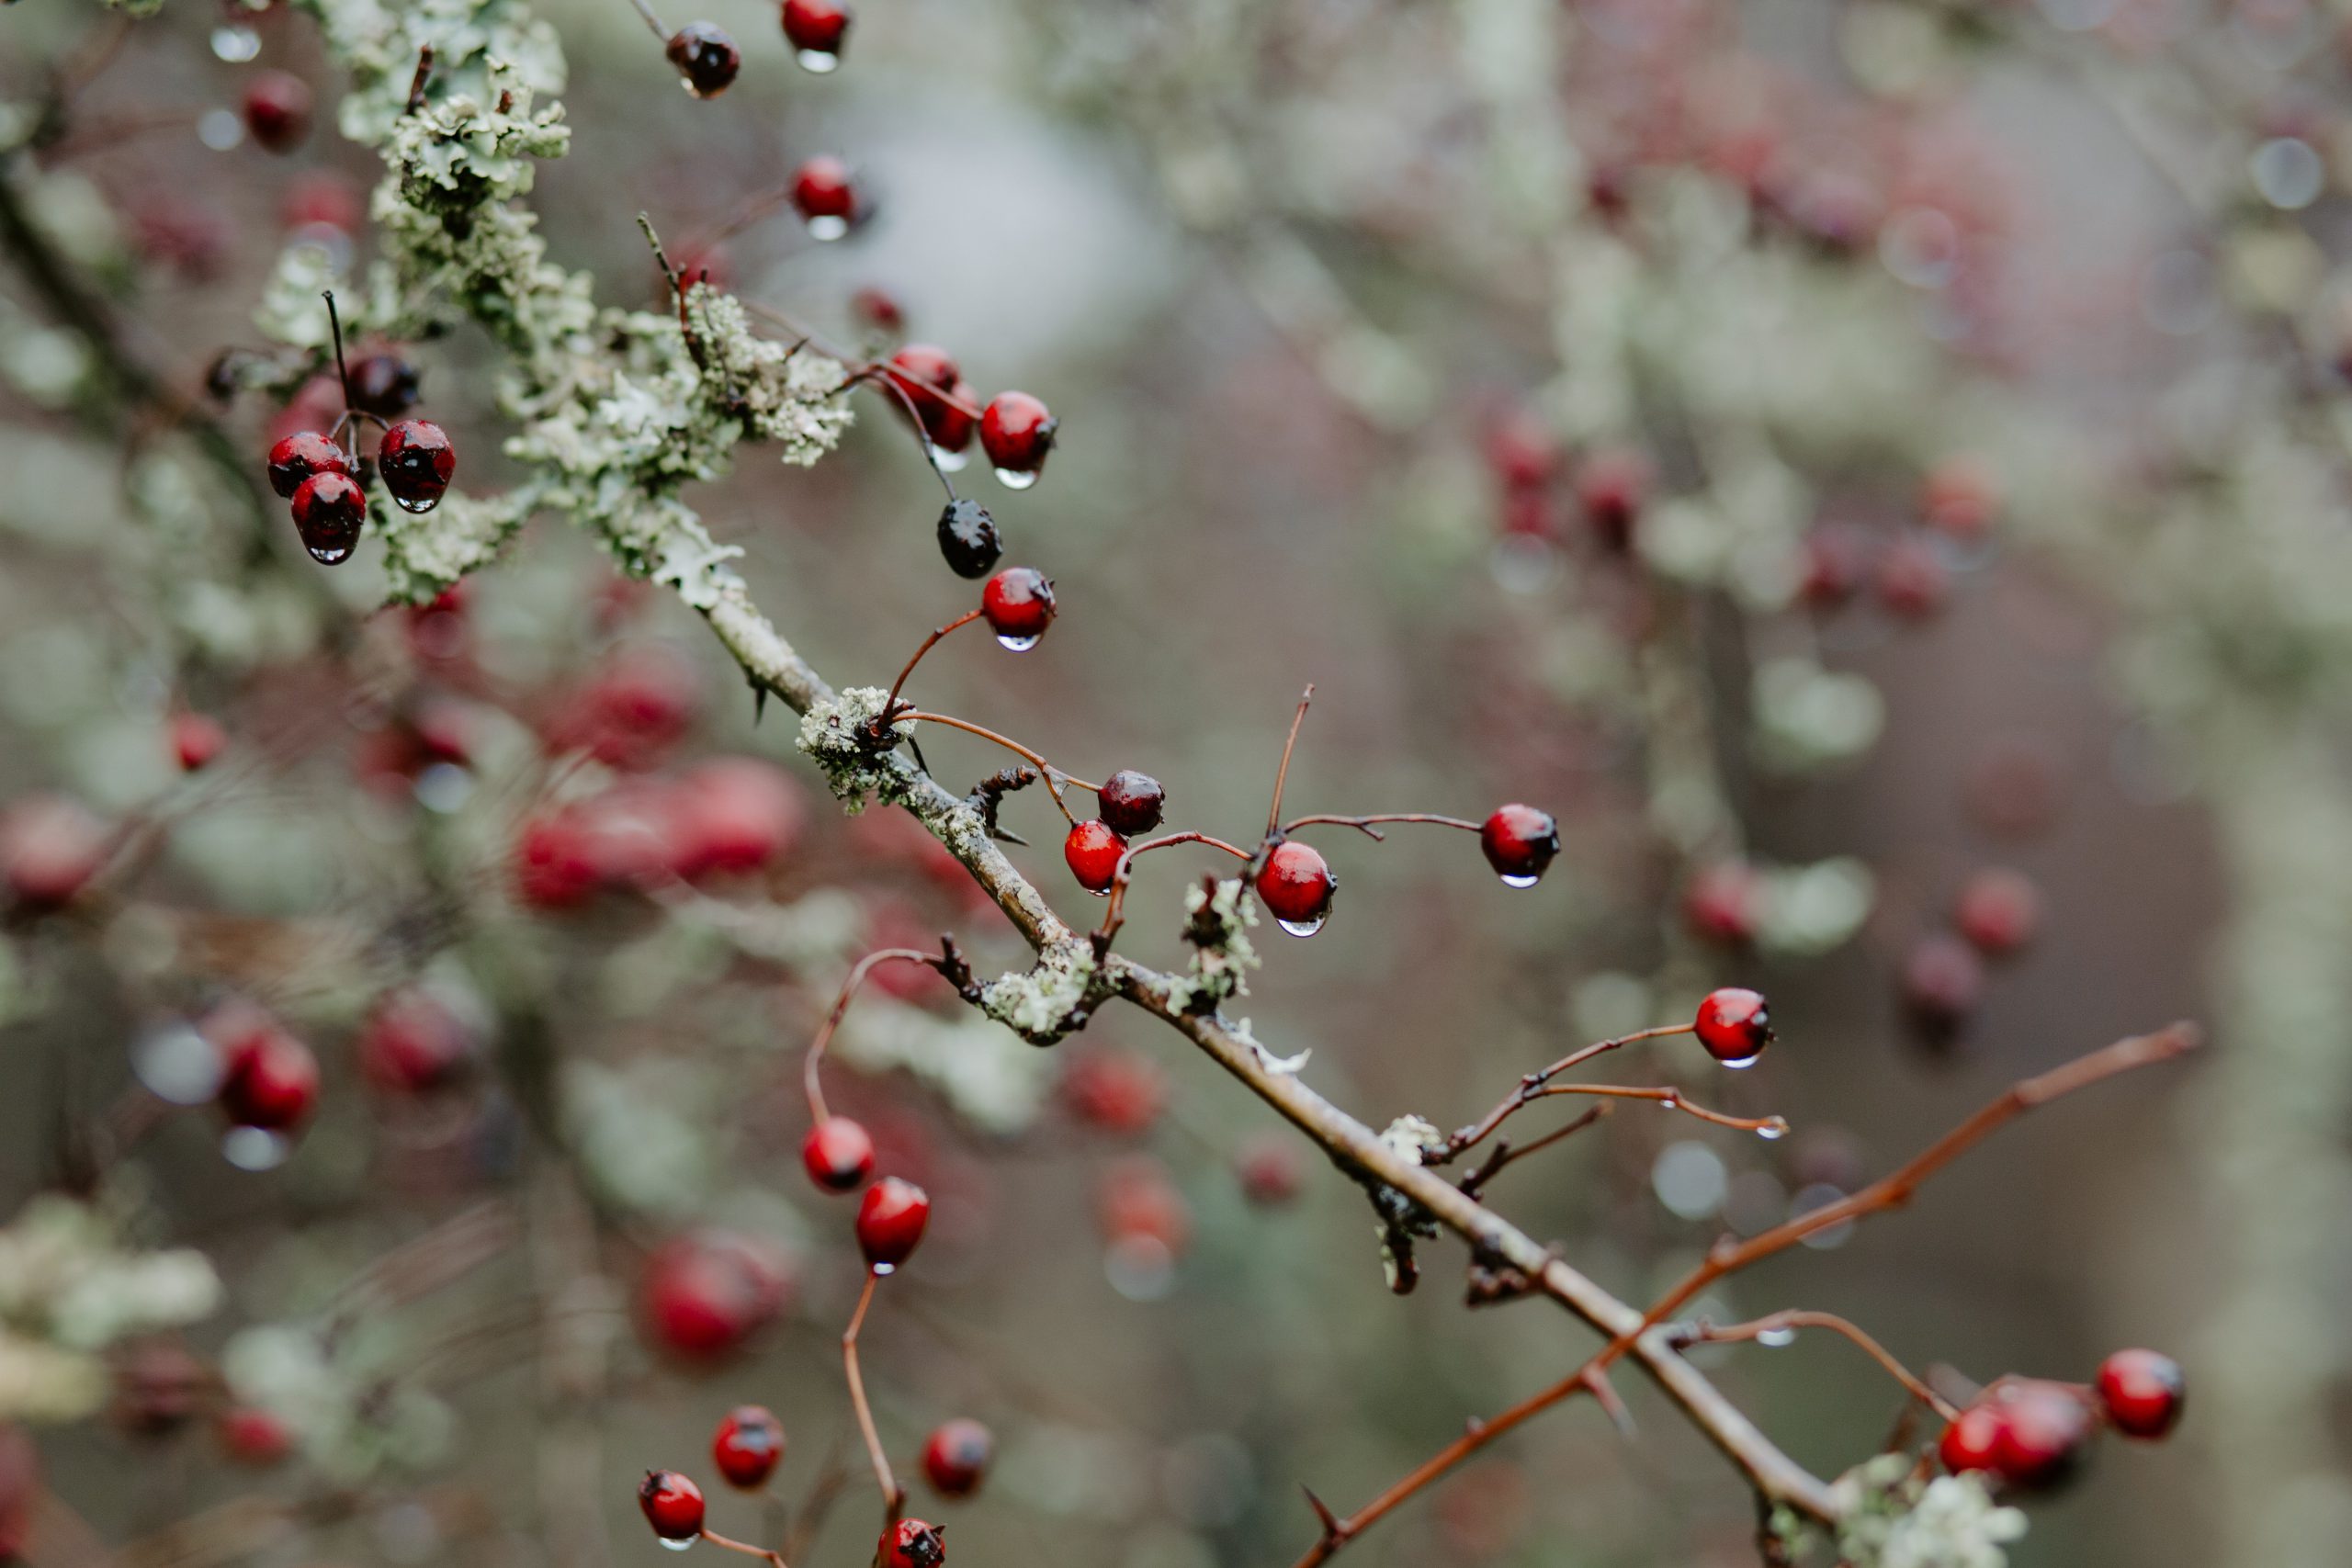 frozen berries on a tree | Photo by Ashleigh Joy Photography on Unsplash